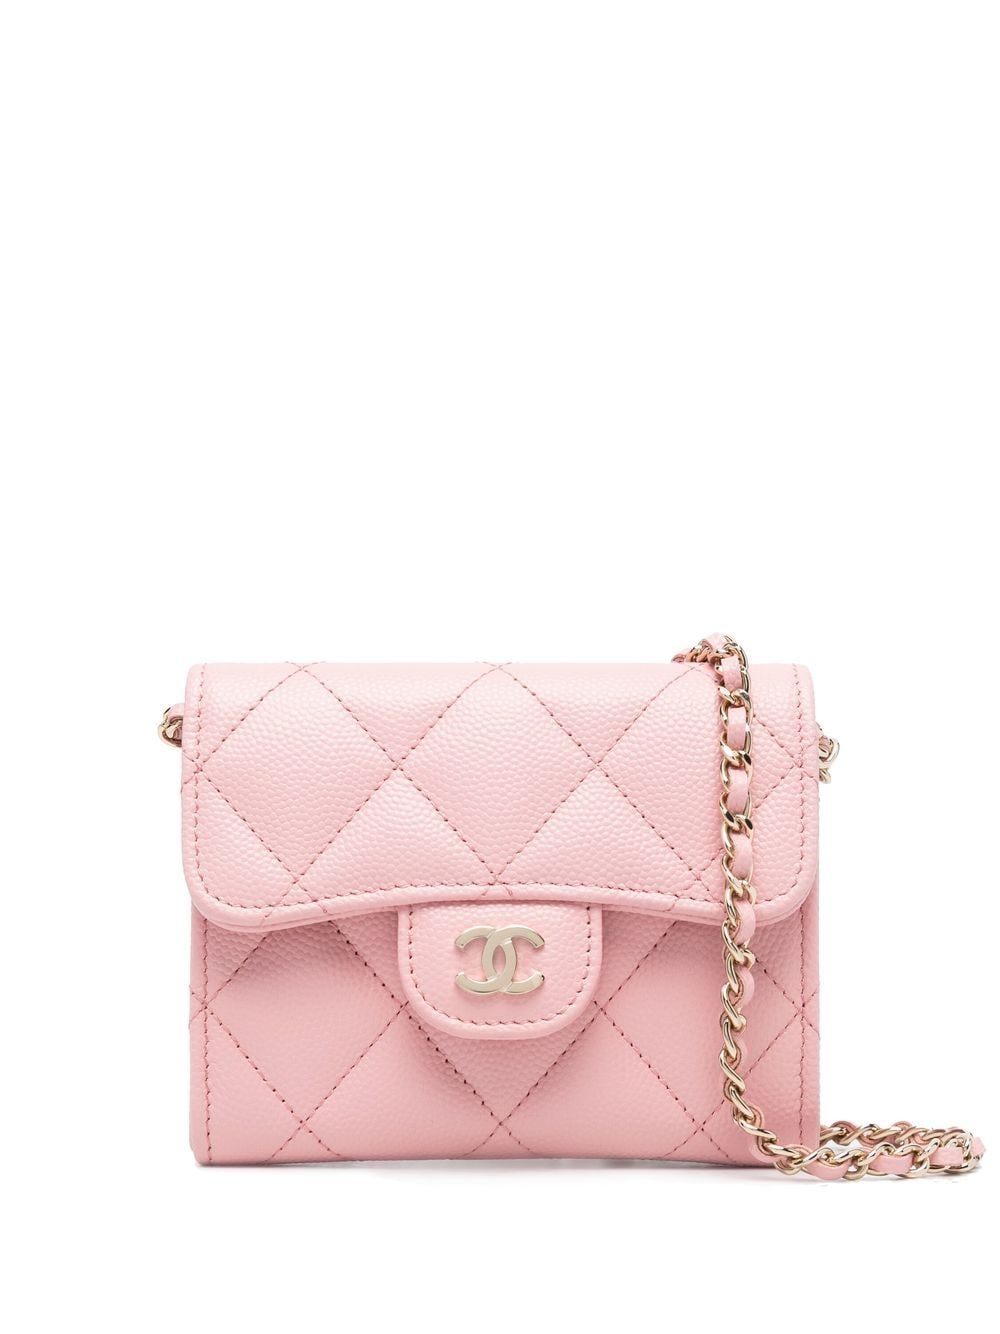 Chanel Pre-owned 2020 Diamond-Quilted Mini Bag - Pink